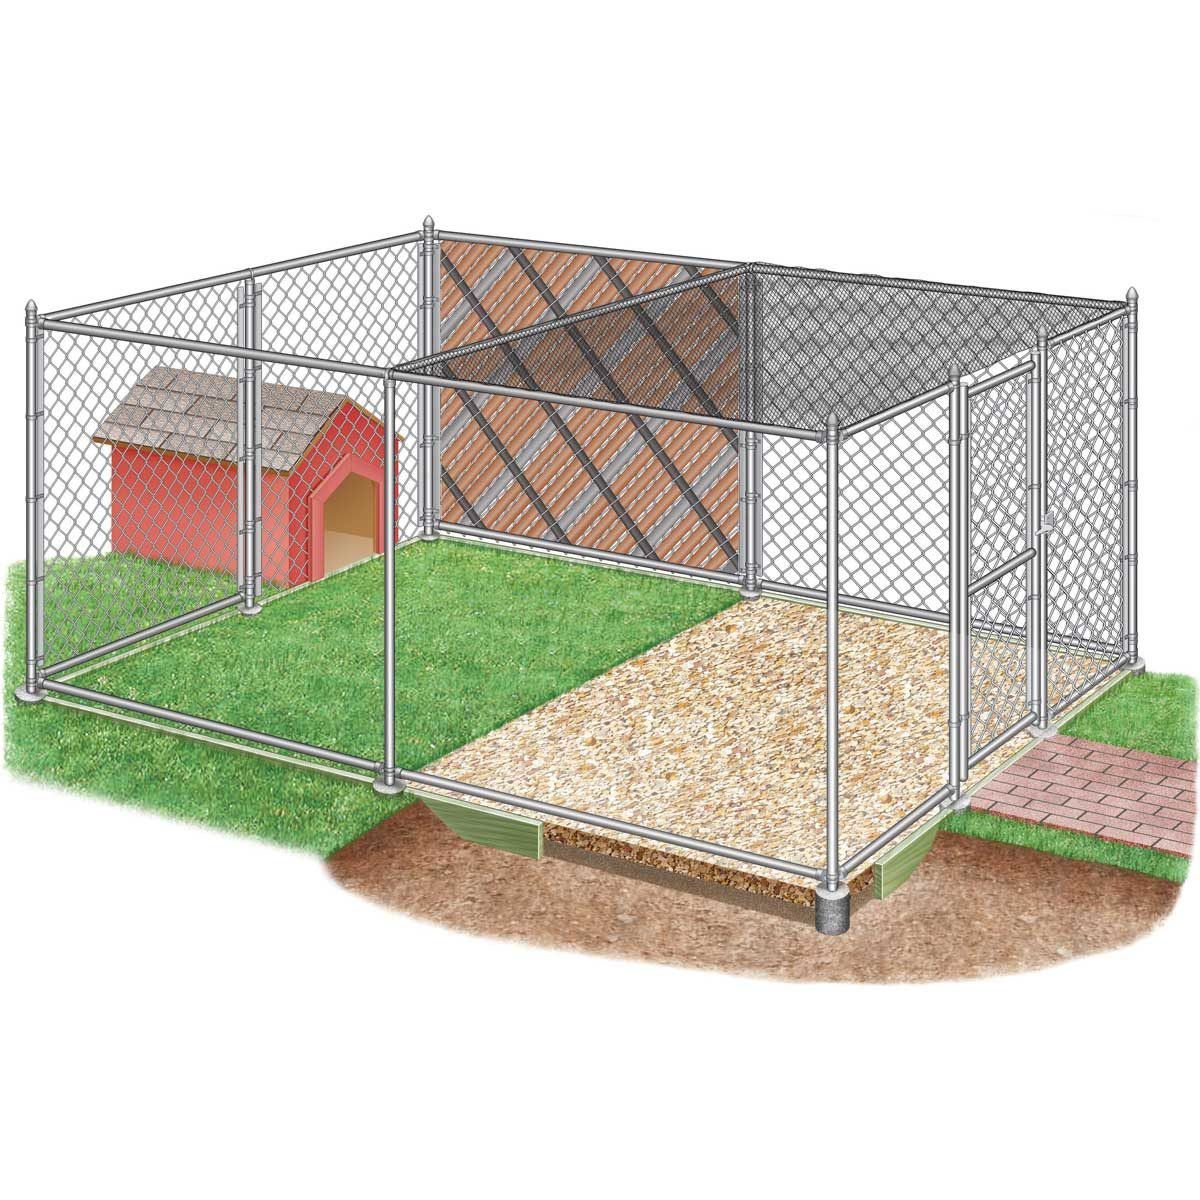 How to Build Chain Link Outdoor Dog Kennels